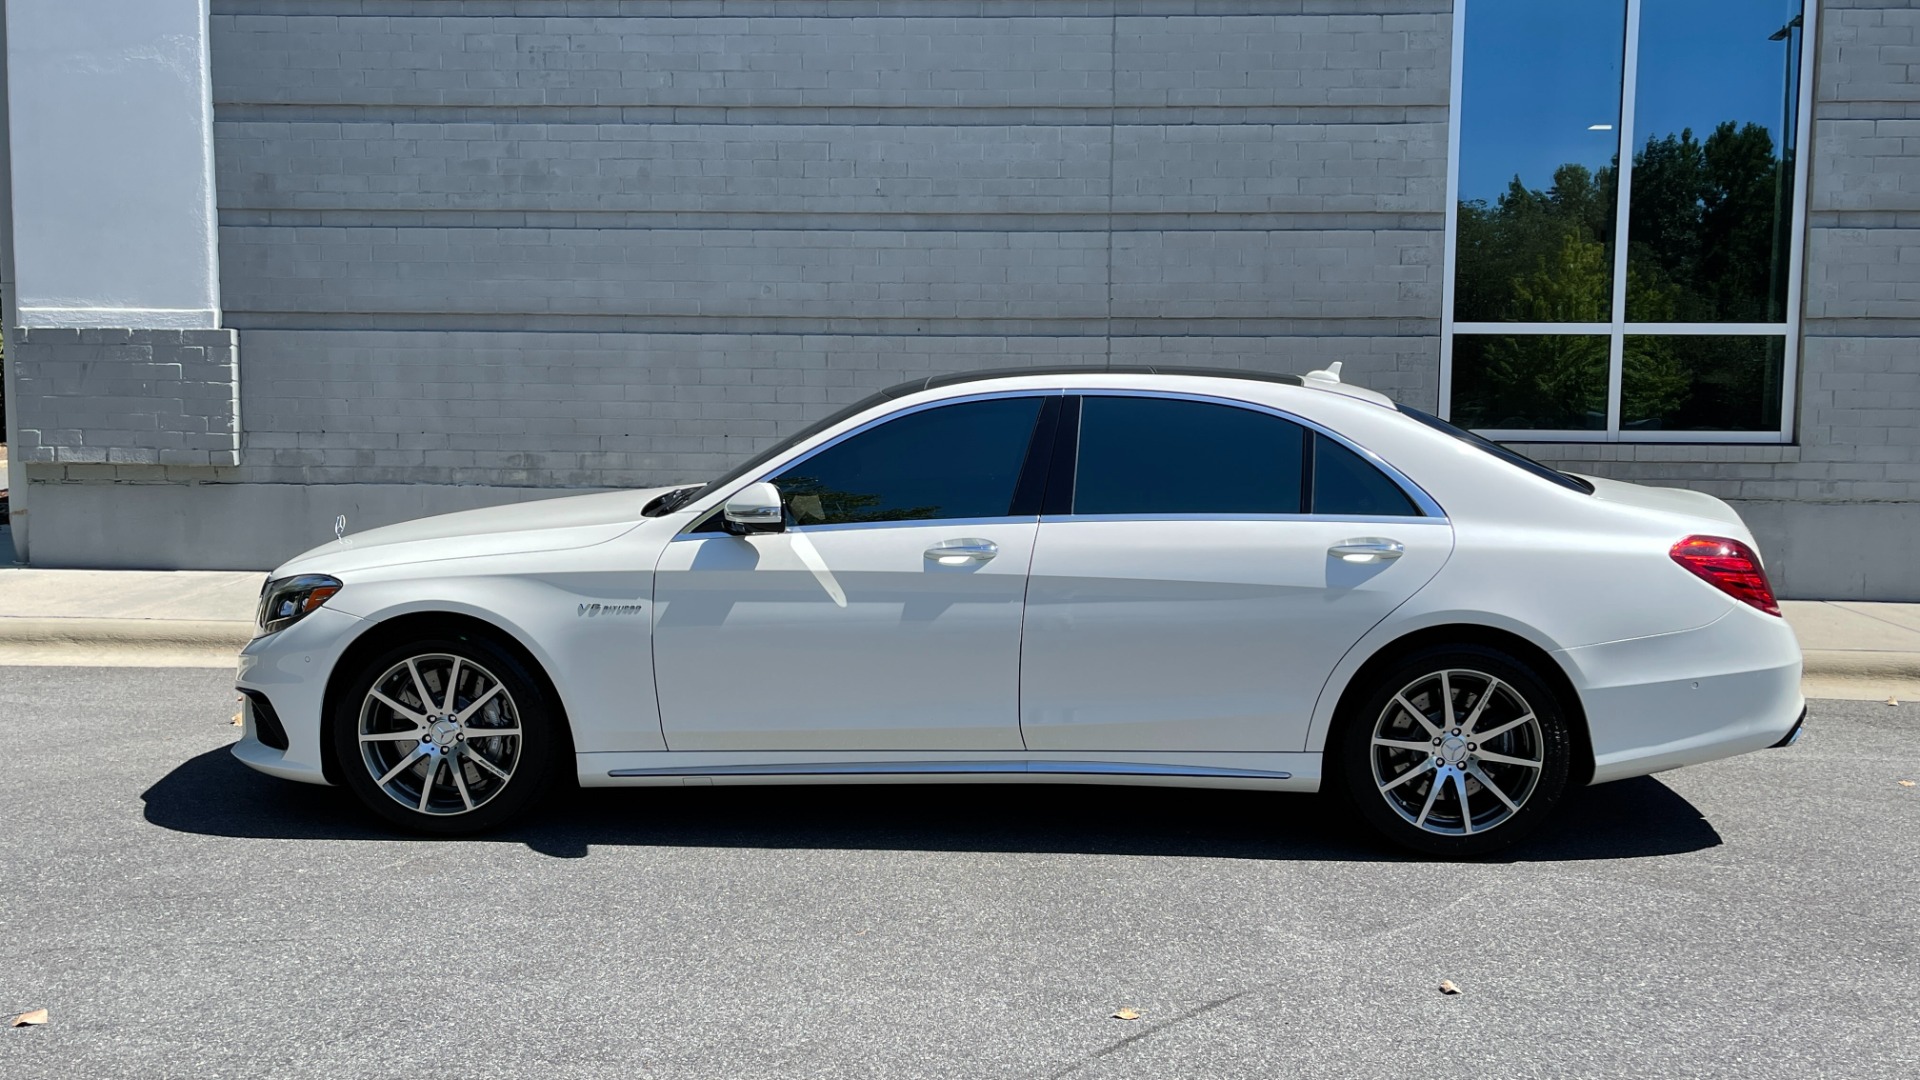 Used 2016 Mercedes-Benz S-Class AMG S63 / EXCLUSIVE TRIM / BURMESTER 3D HIGH END SOUND / DRIVER ASSISTANCE  for sale Sold at Formula Imports in Charlotte NC 28227 6